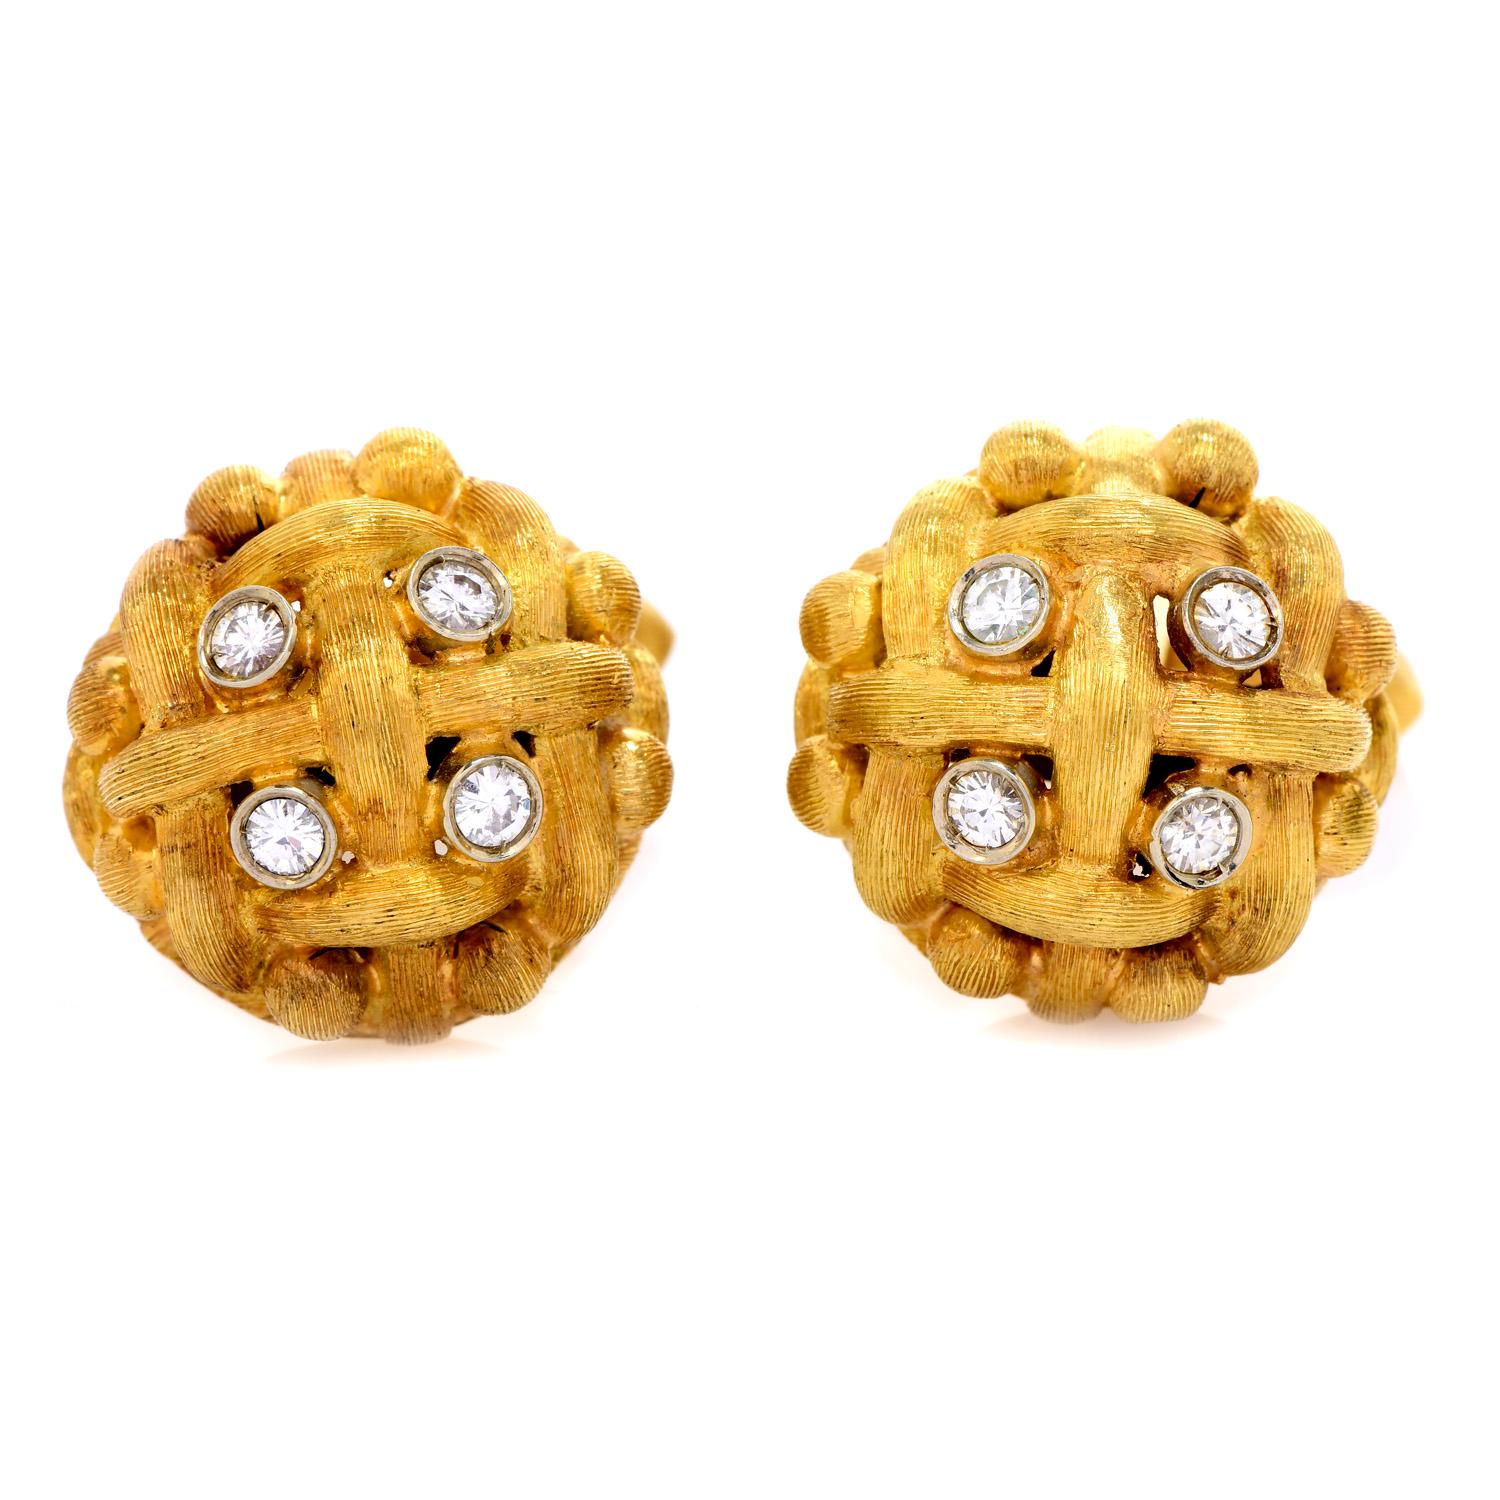 Vintage 1980'S Retro Diamond 18K Gold Woven Style with satin-textured Rope accents Cufflinks, 

This is an exquisite pair of classy cufflinks, weighing approximately 18.4 grams 

Handcrafted in solid heavy 18K yellow gold, each cufflink is